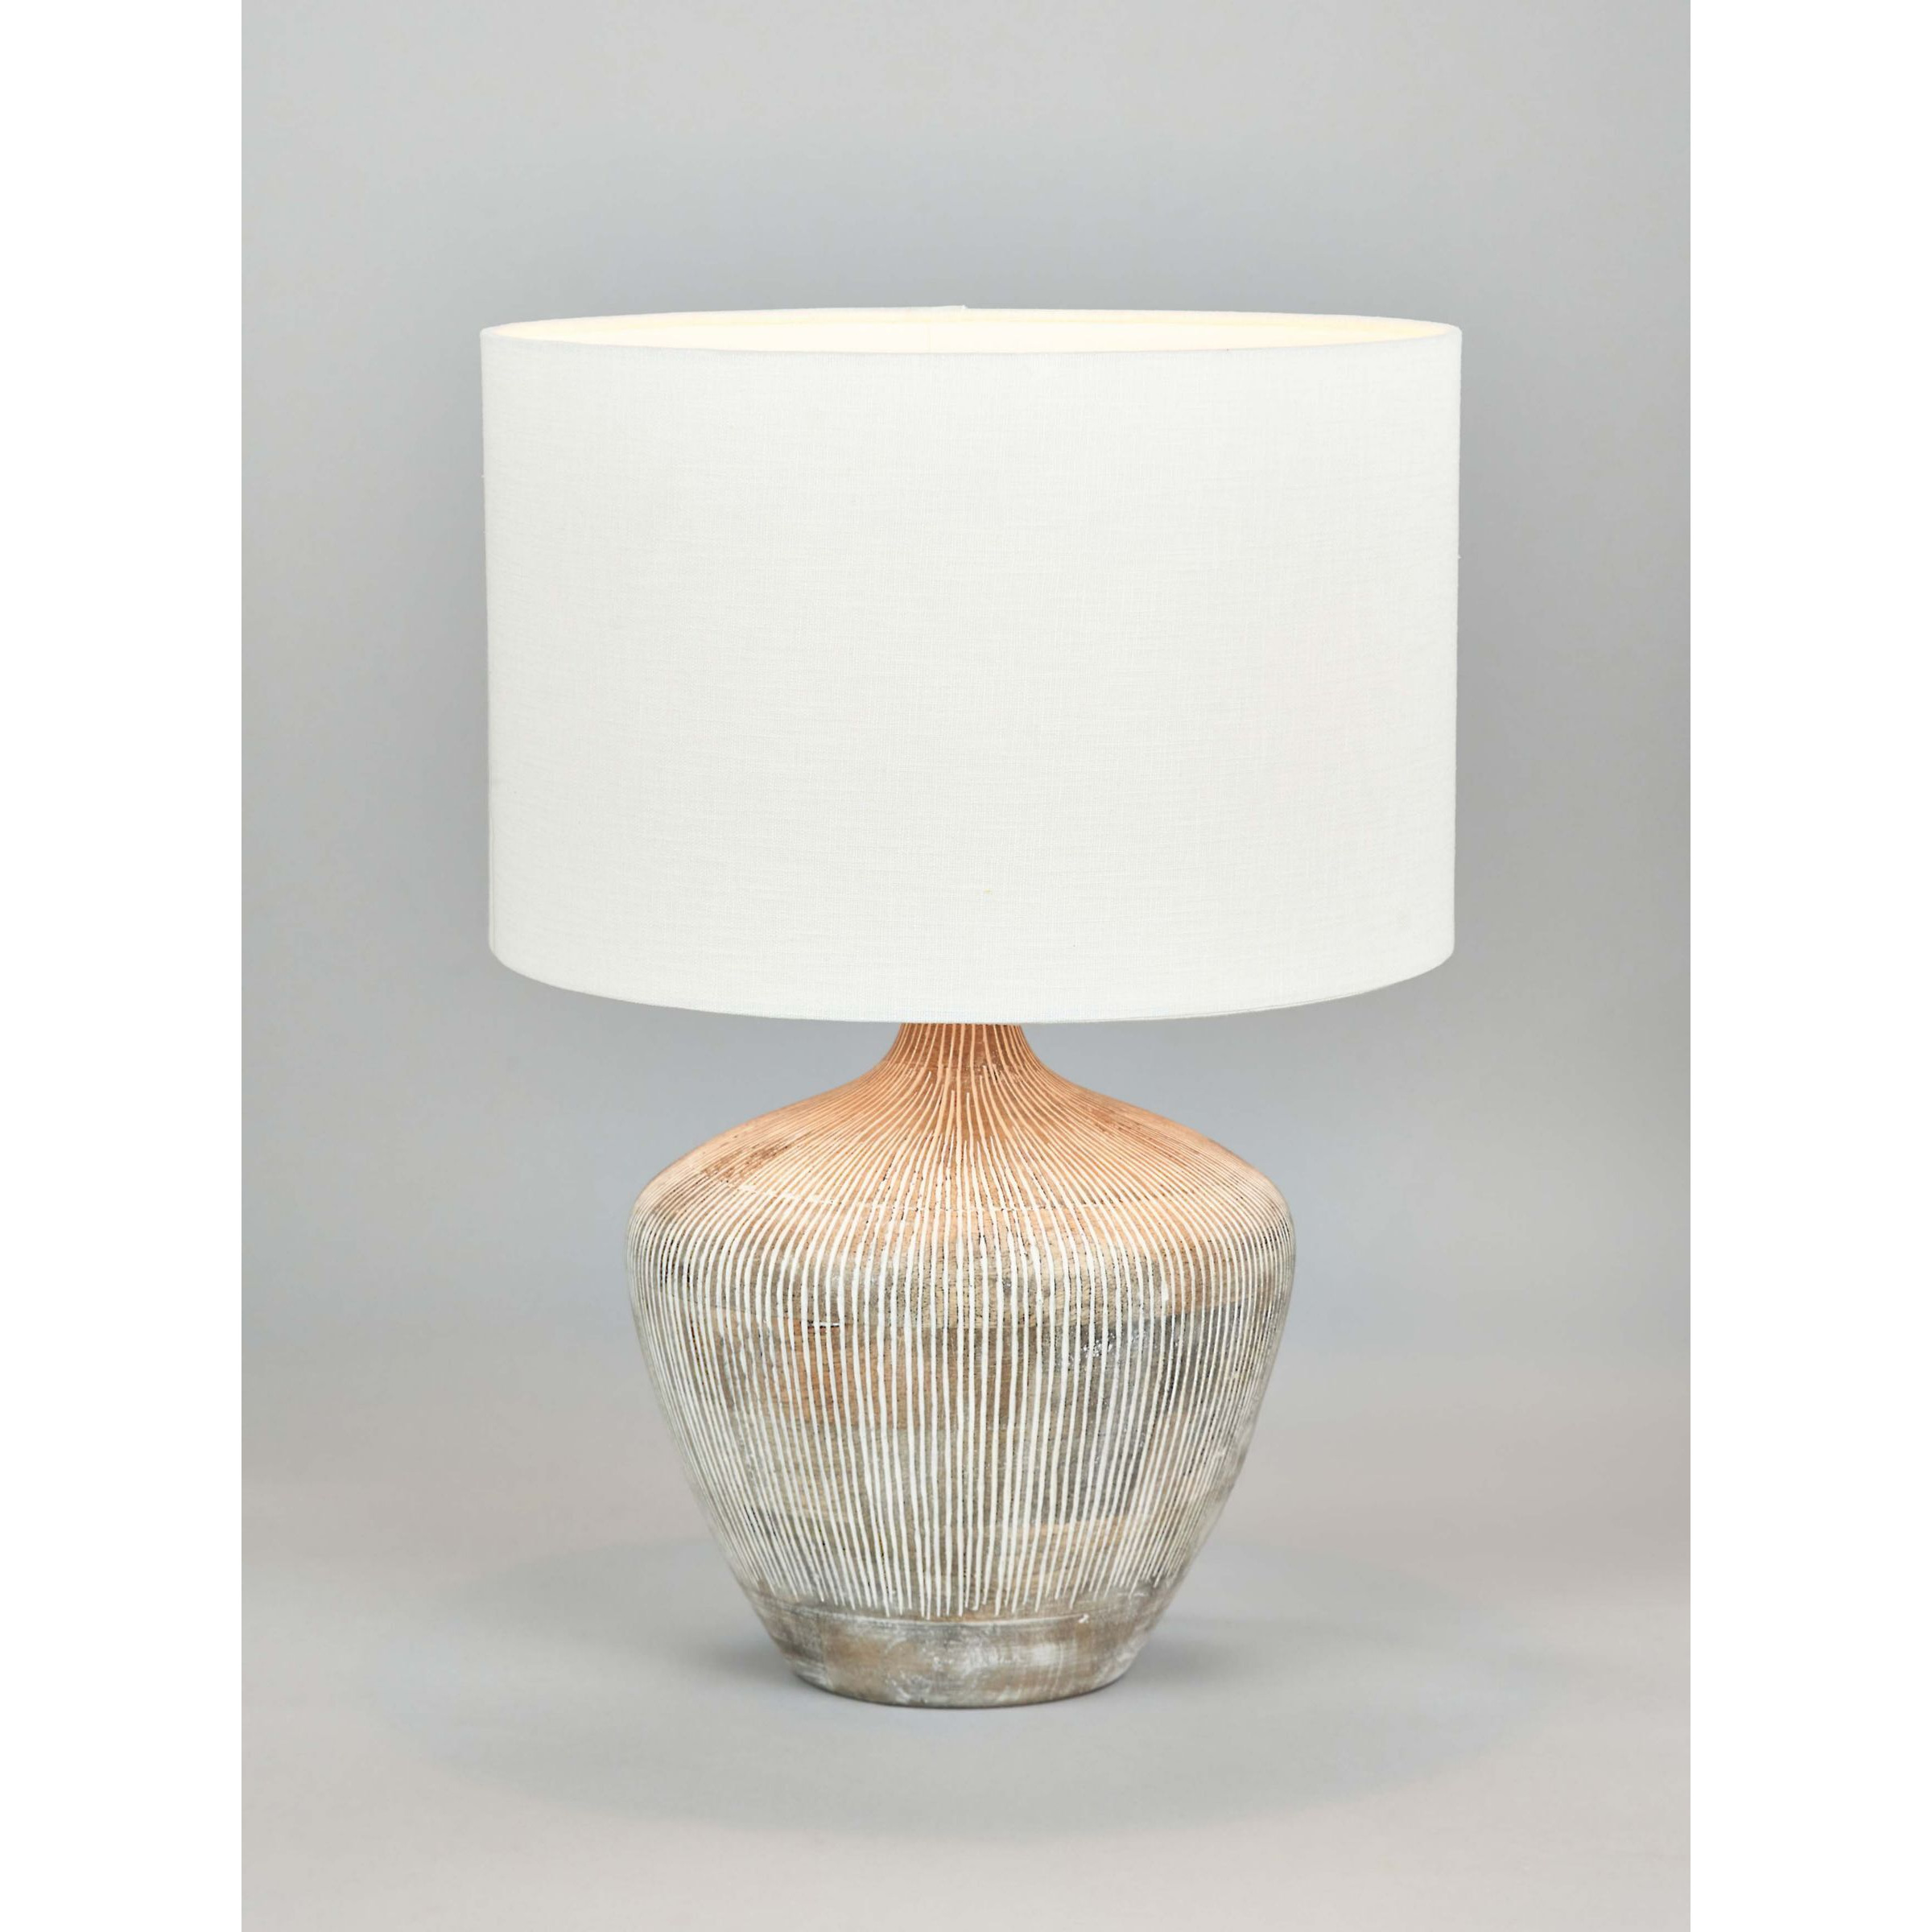 Pacific Manaia Wooden Table Lamp, White Wash - image 1